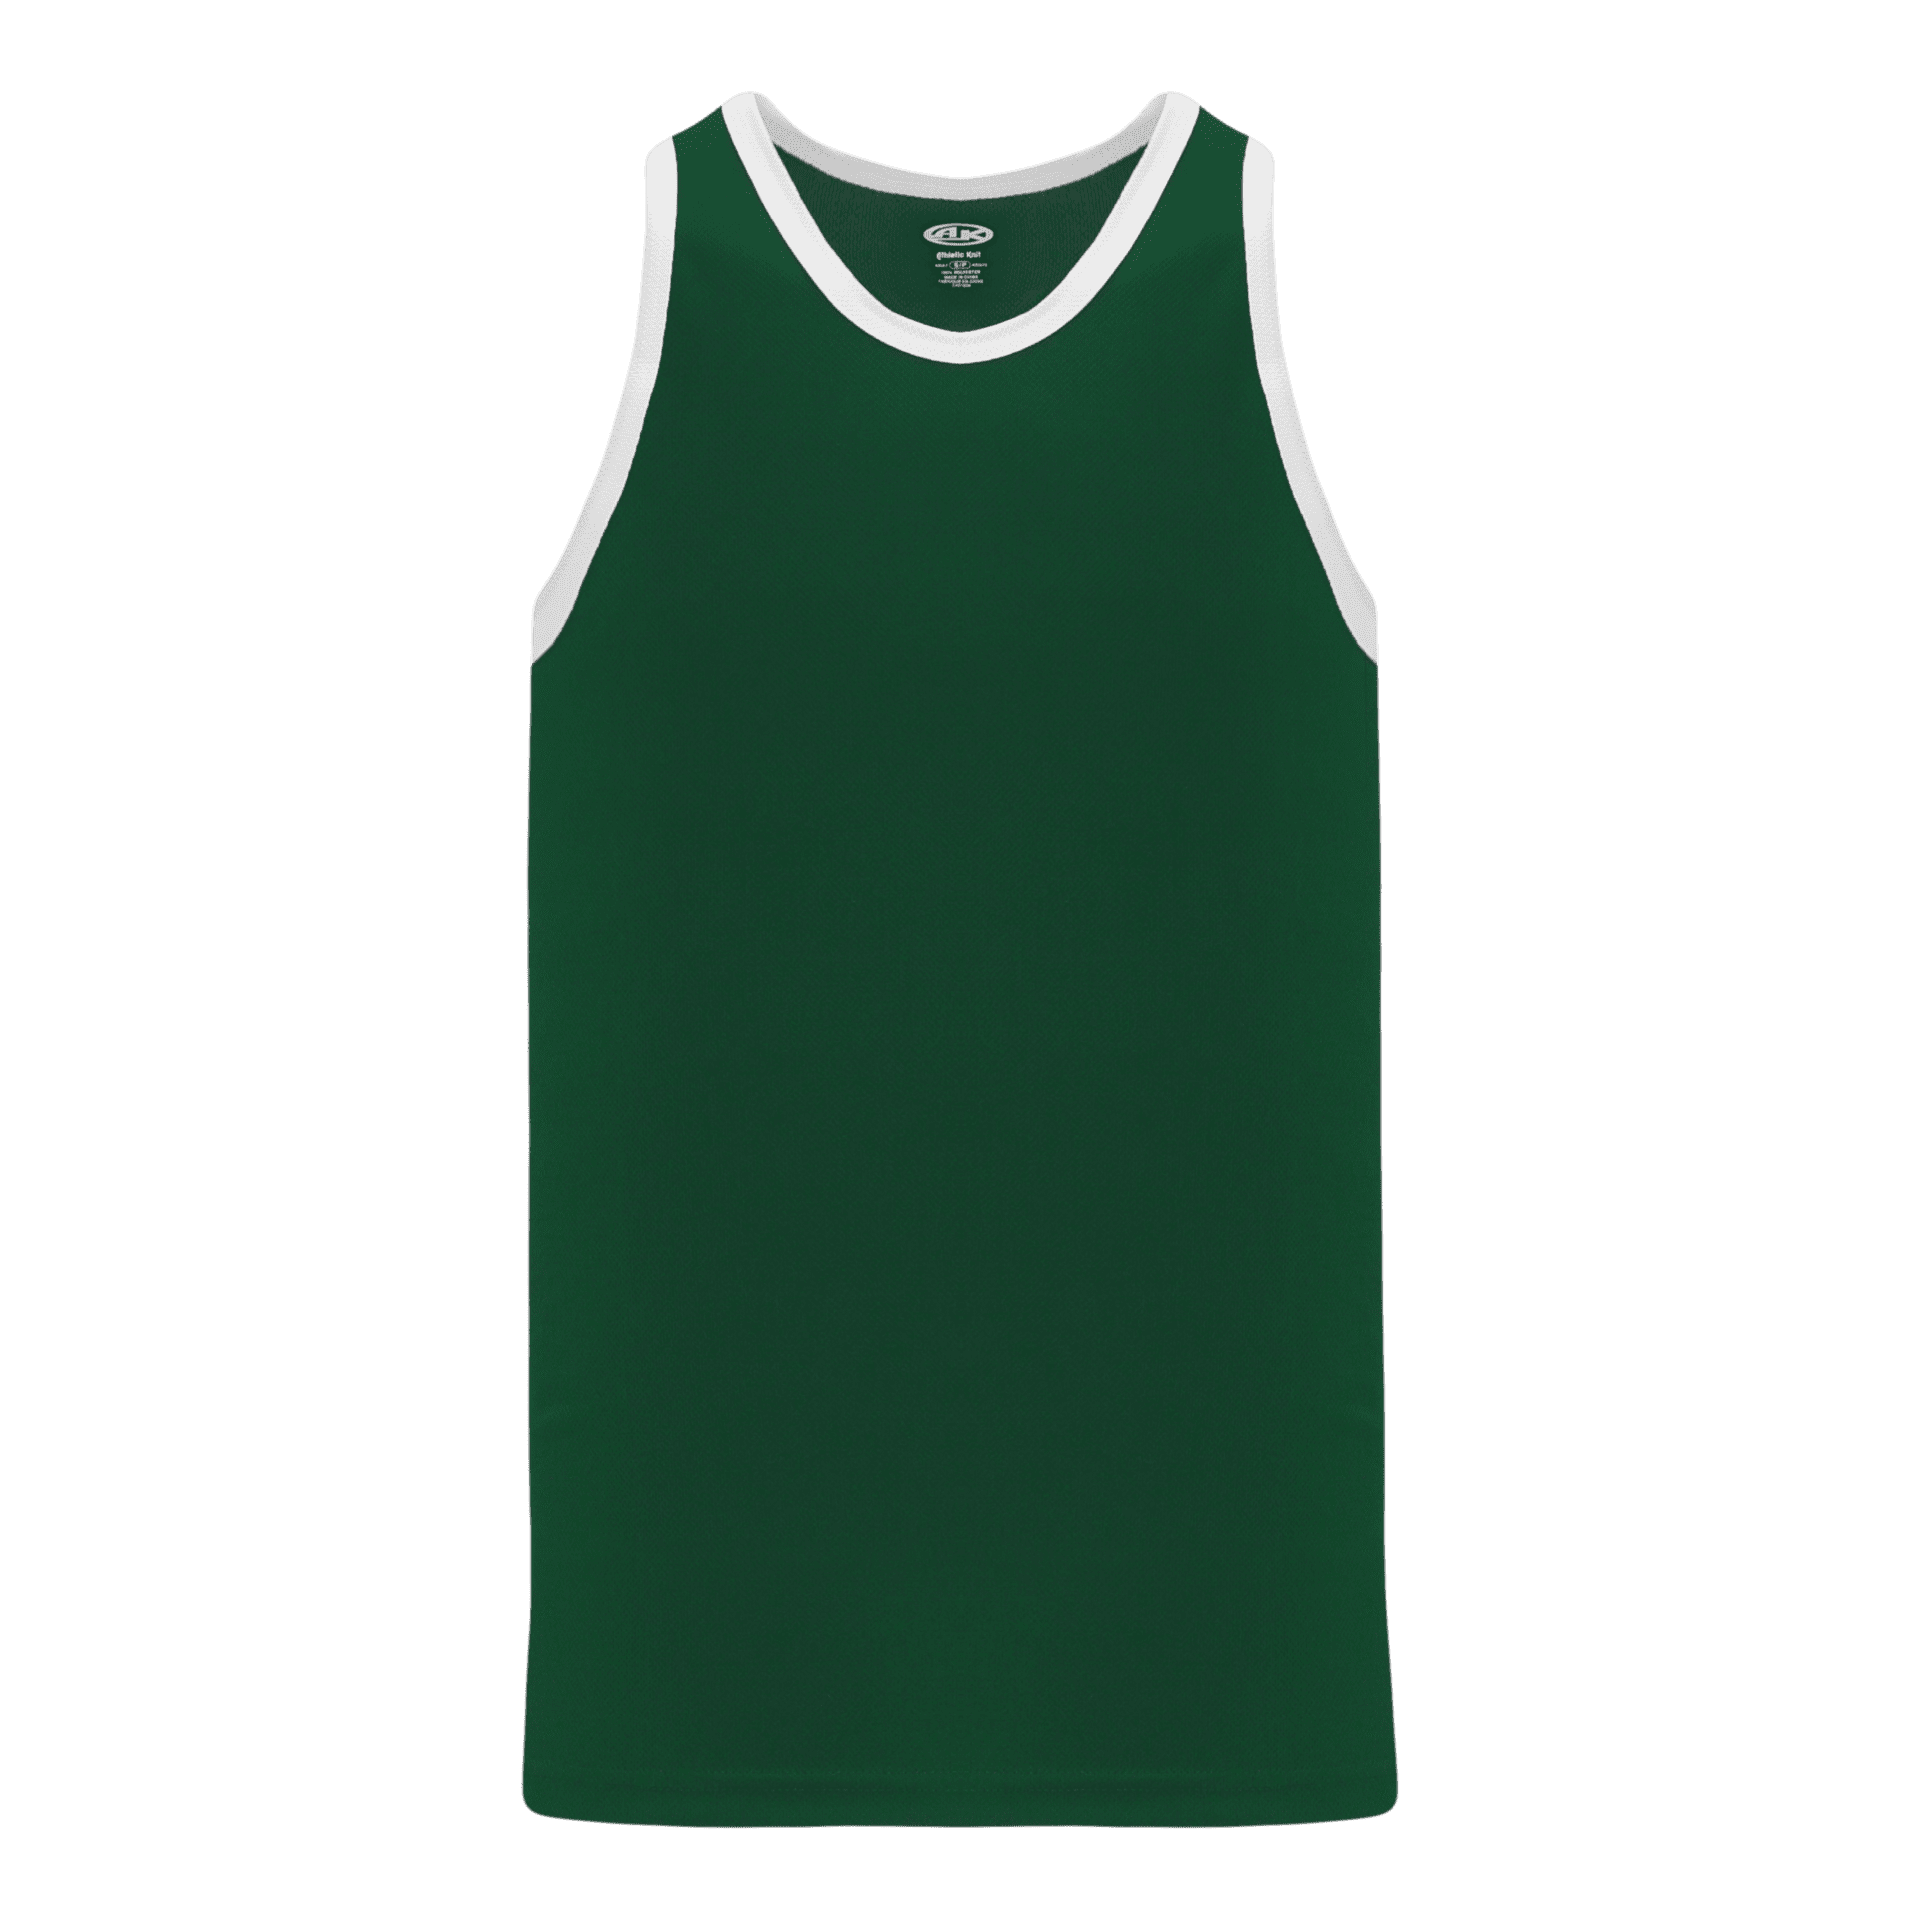 ATHLETIC KNIT LEAGUE BASKETBALL JERSEY #B1325 Forest Green / White